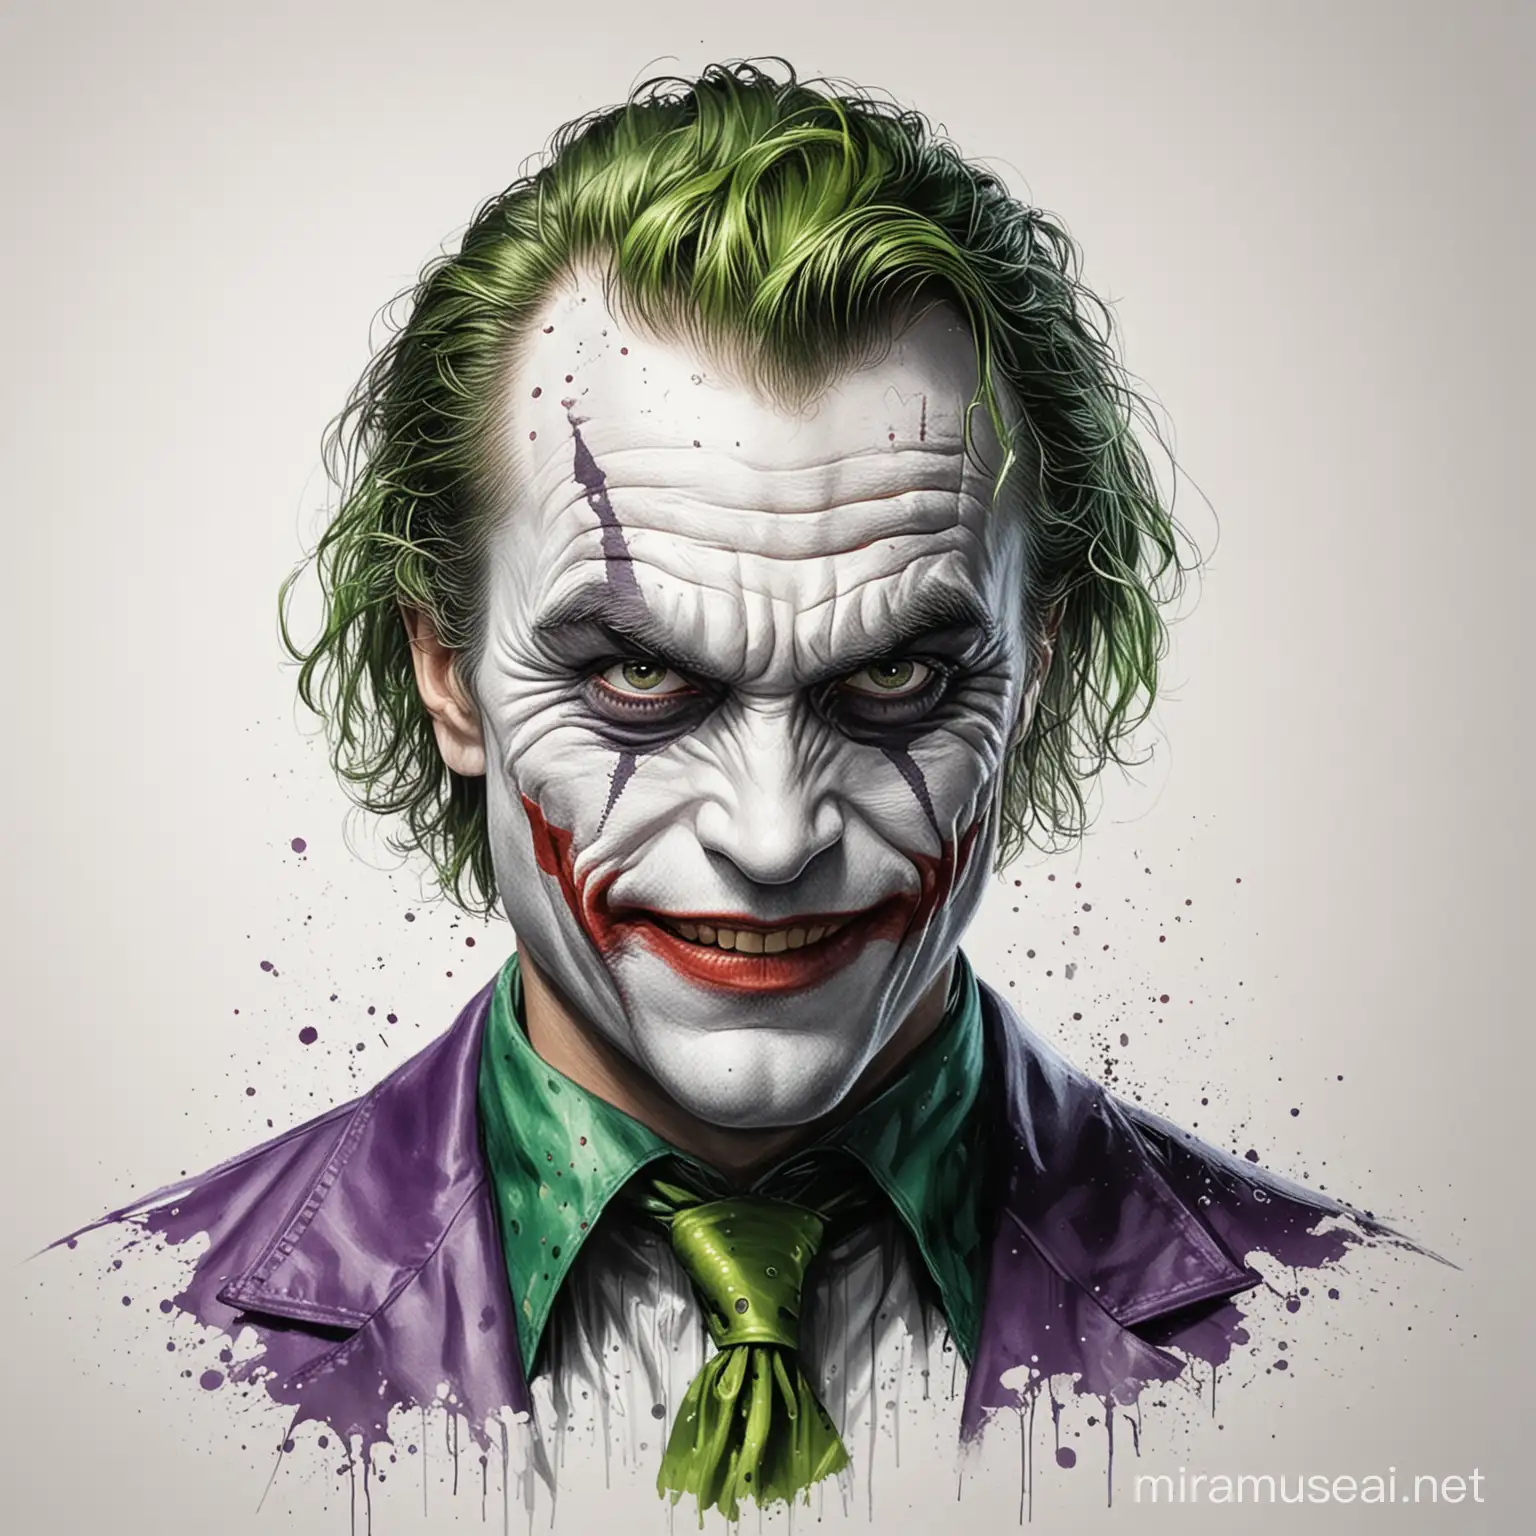 the joker from batman on a white background as a drawing
full color
